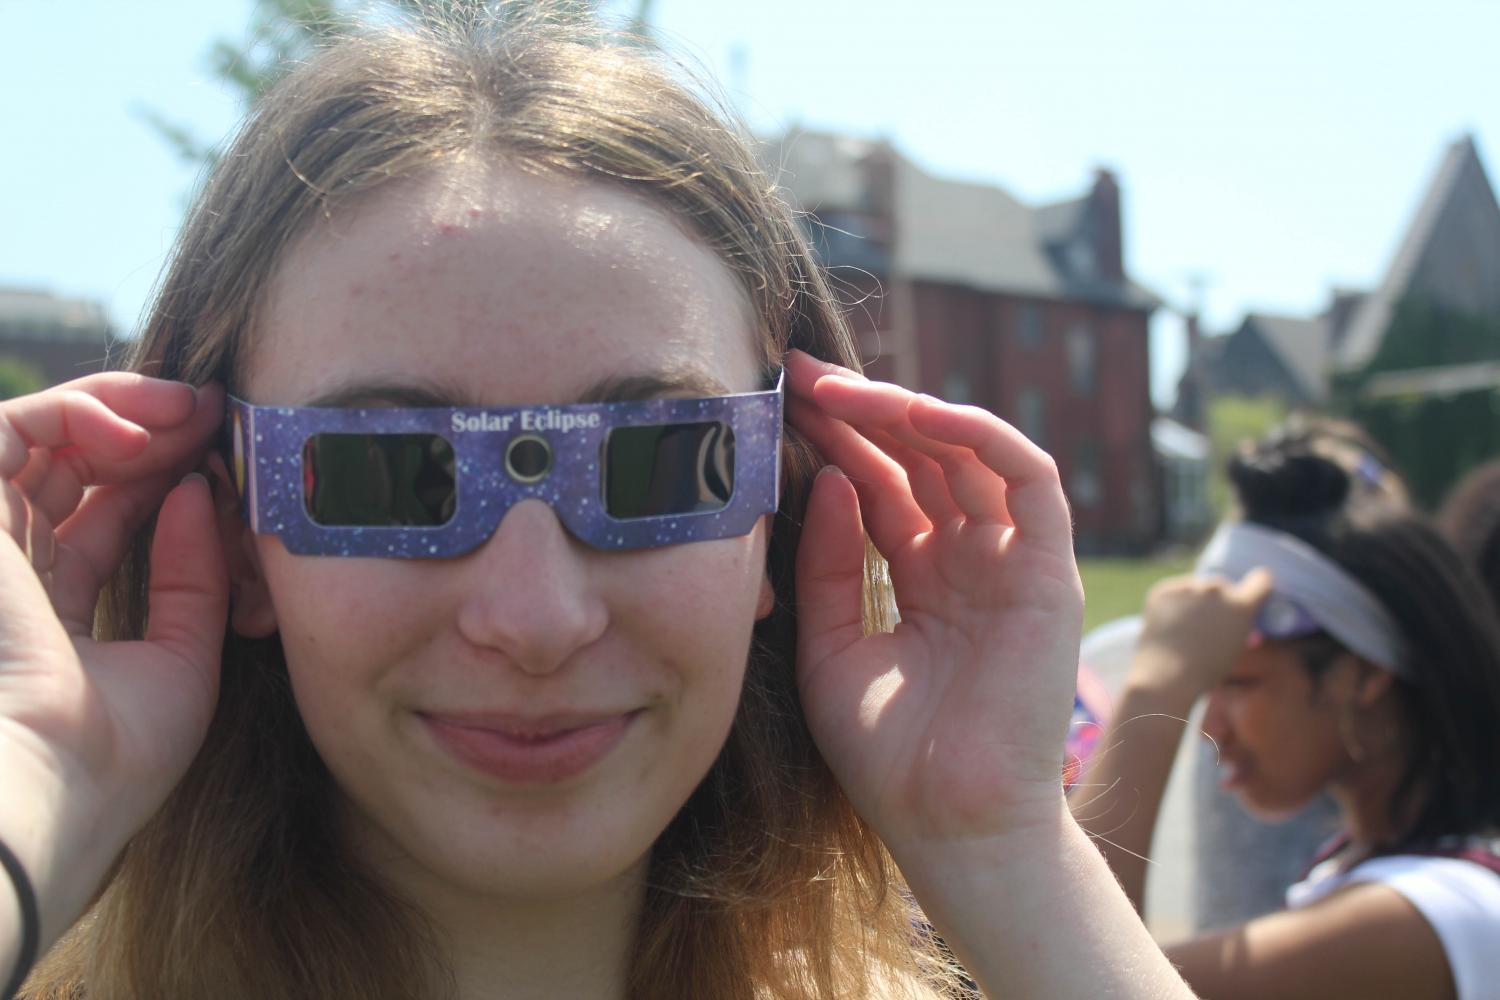 Amirah+Bauder+puts+on+her+glasses+to+watch+the+eclipse.++Bauder+says+her+favorite+part+was+how+it+was+dark+even+though+it+was+in+the+afternoon.++It+was+really+cool+to+get+to+see+the+sun+slowly+get+covered+by+the+moon%2C+and+the+sun+slowly+disappear%2C+but+my+favorite+was+seeing+my+surroundings+get+darker%2C+because+it+felt+like+night%2C+Bauder+said.